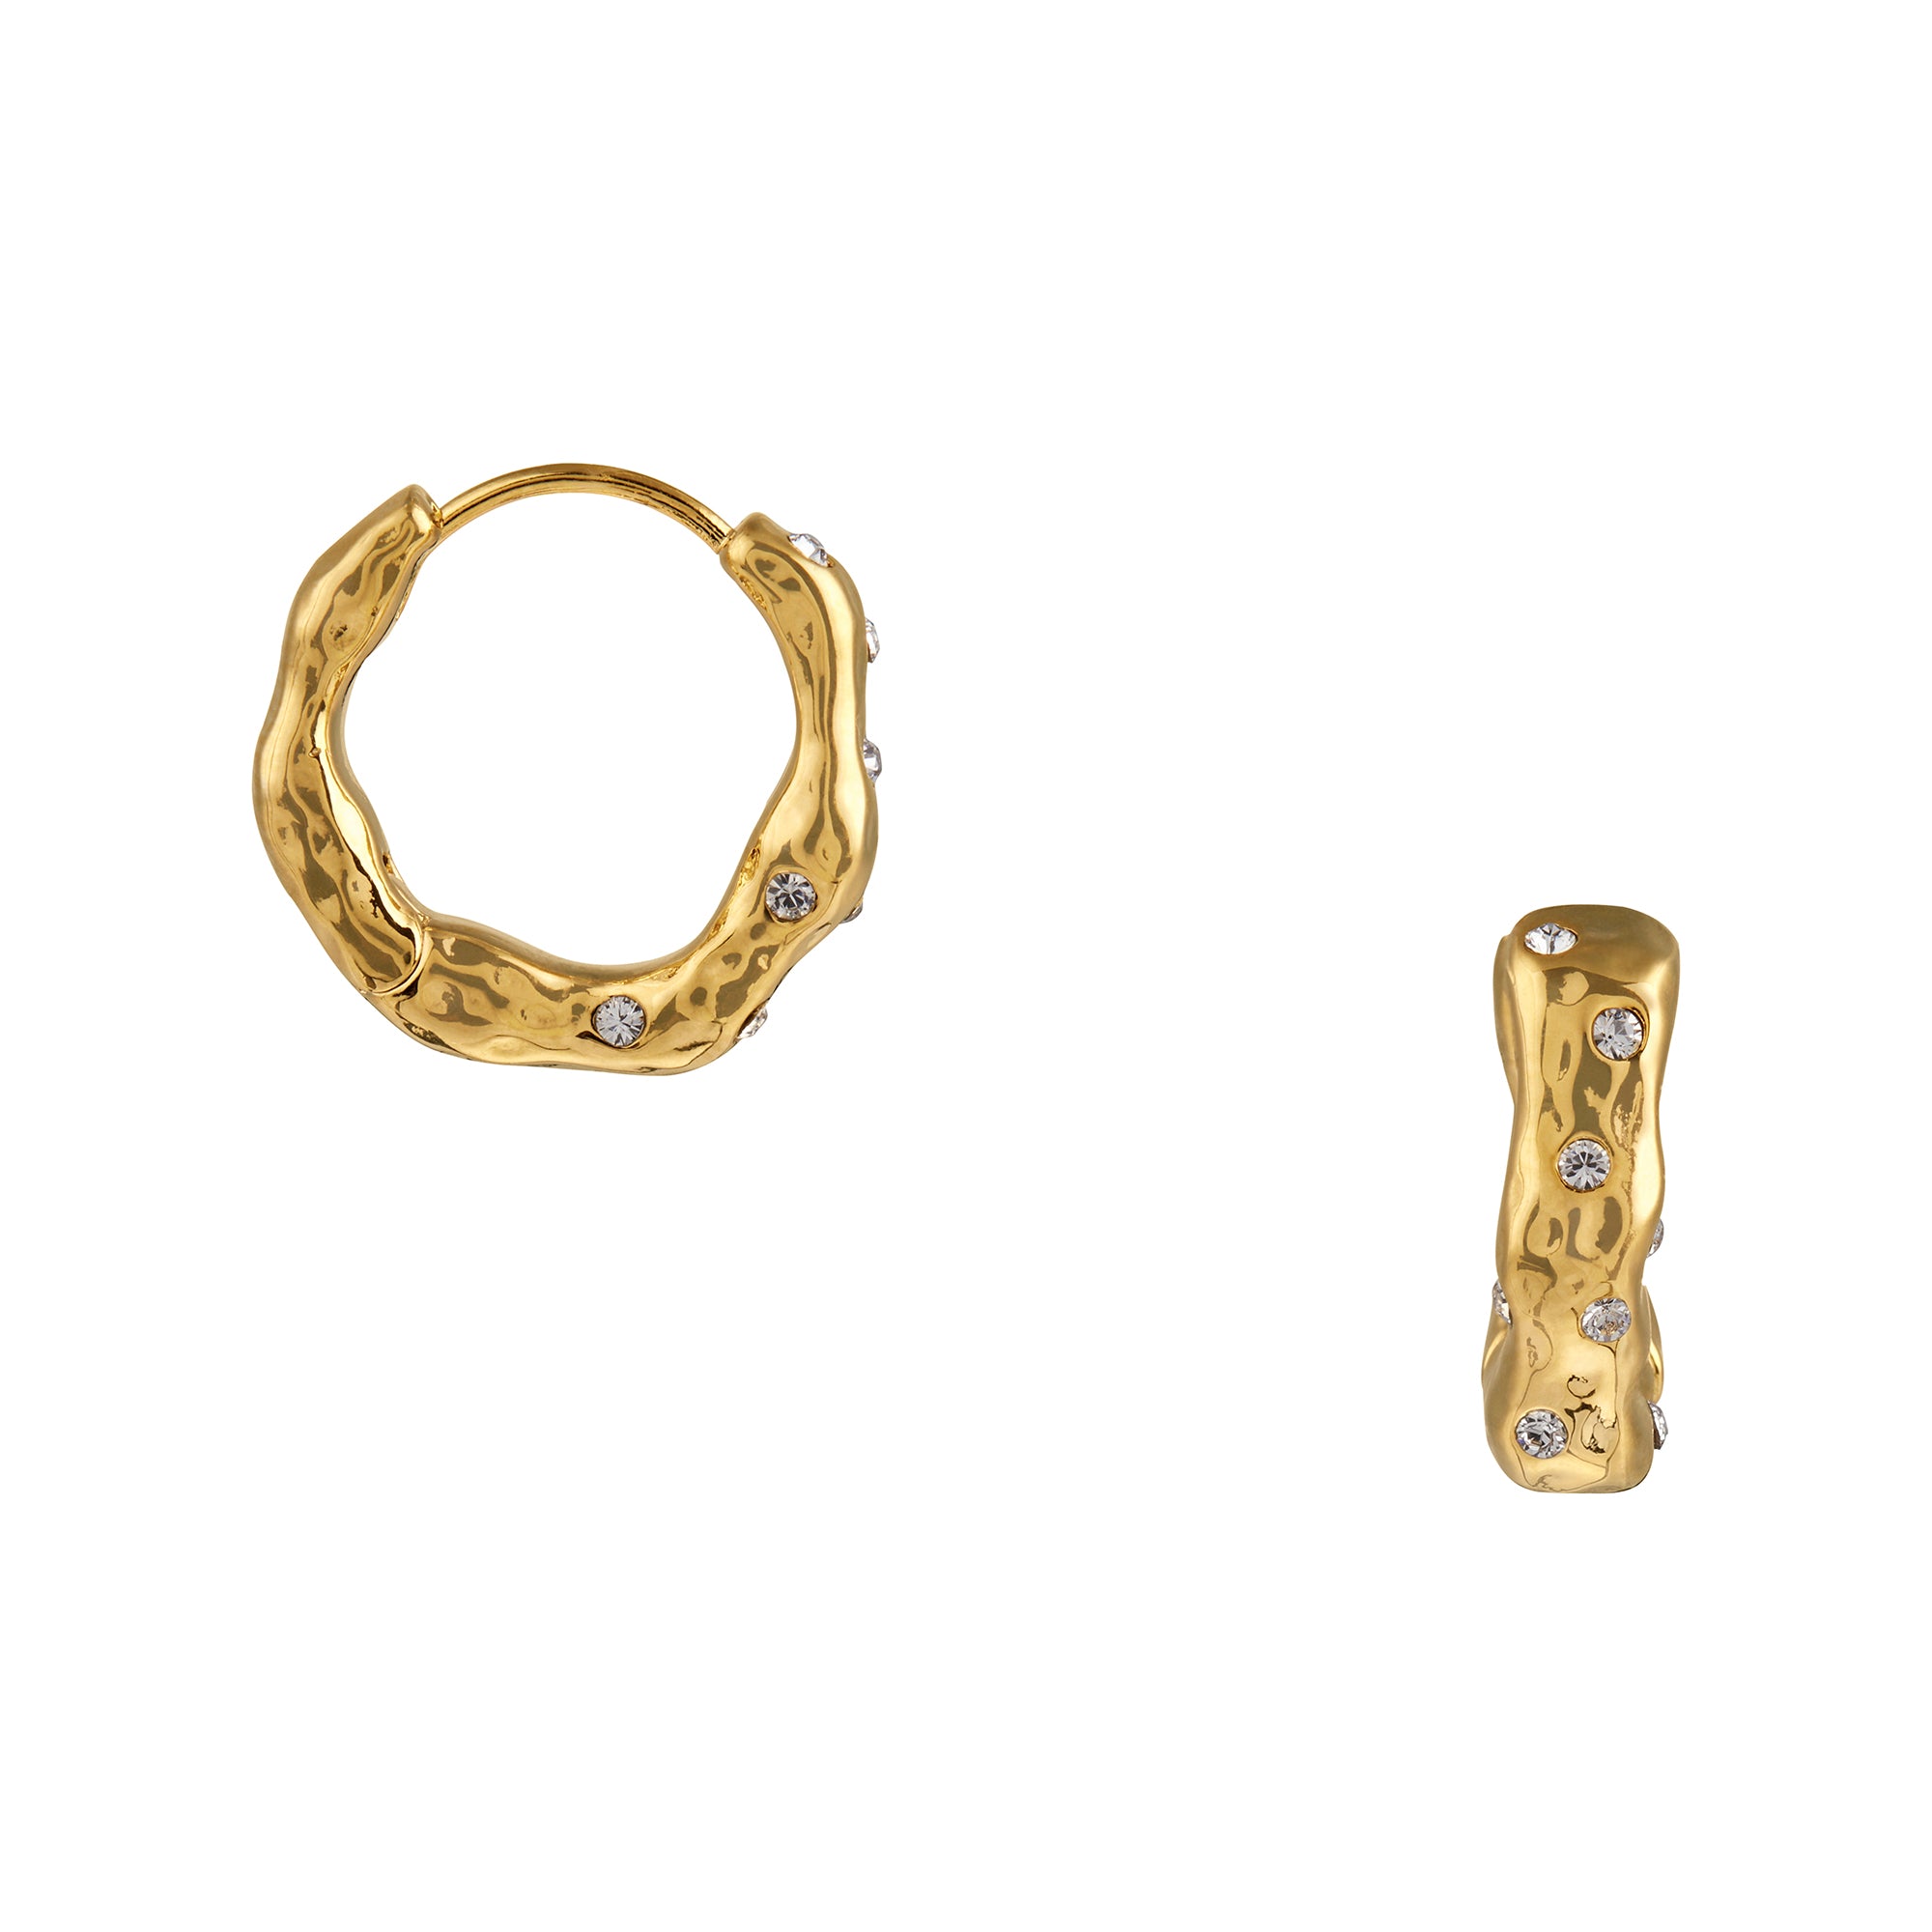 Molten Mid-Sized Hoop Earrings Made With Swarovski Crystals - Orelia London